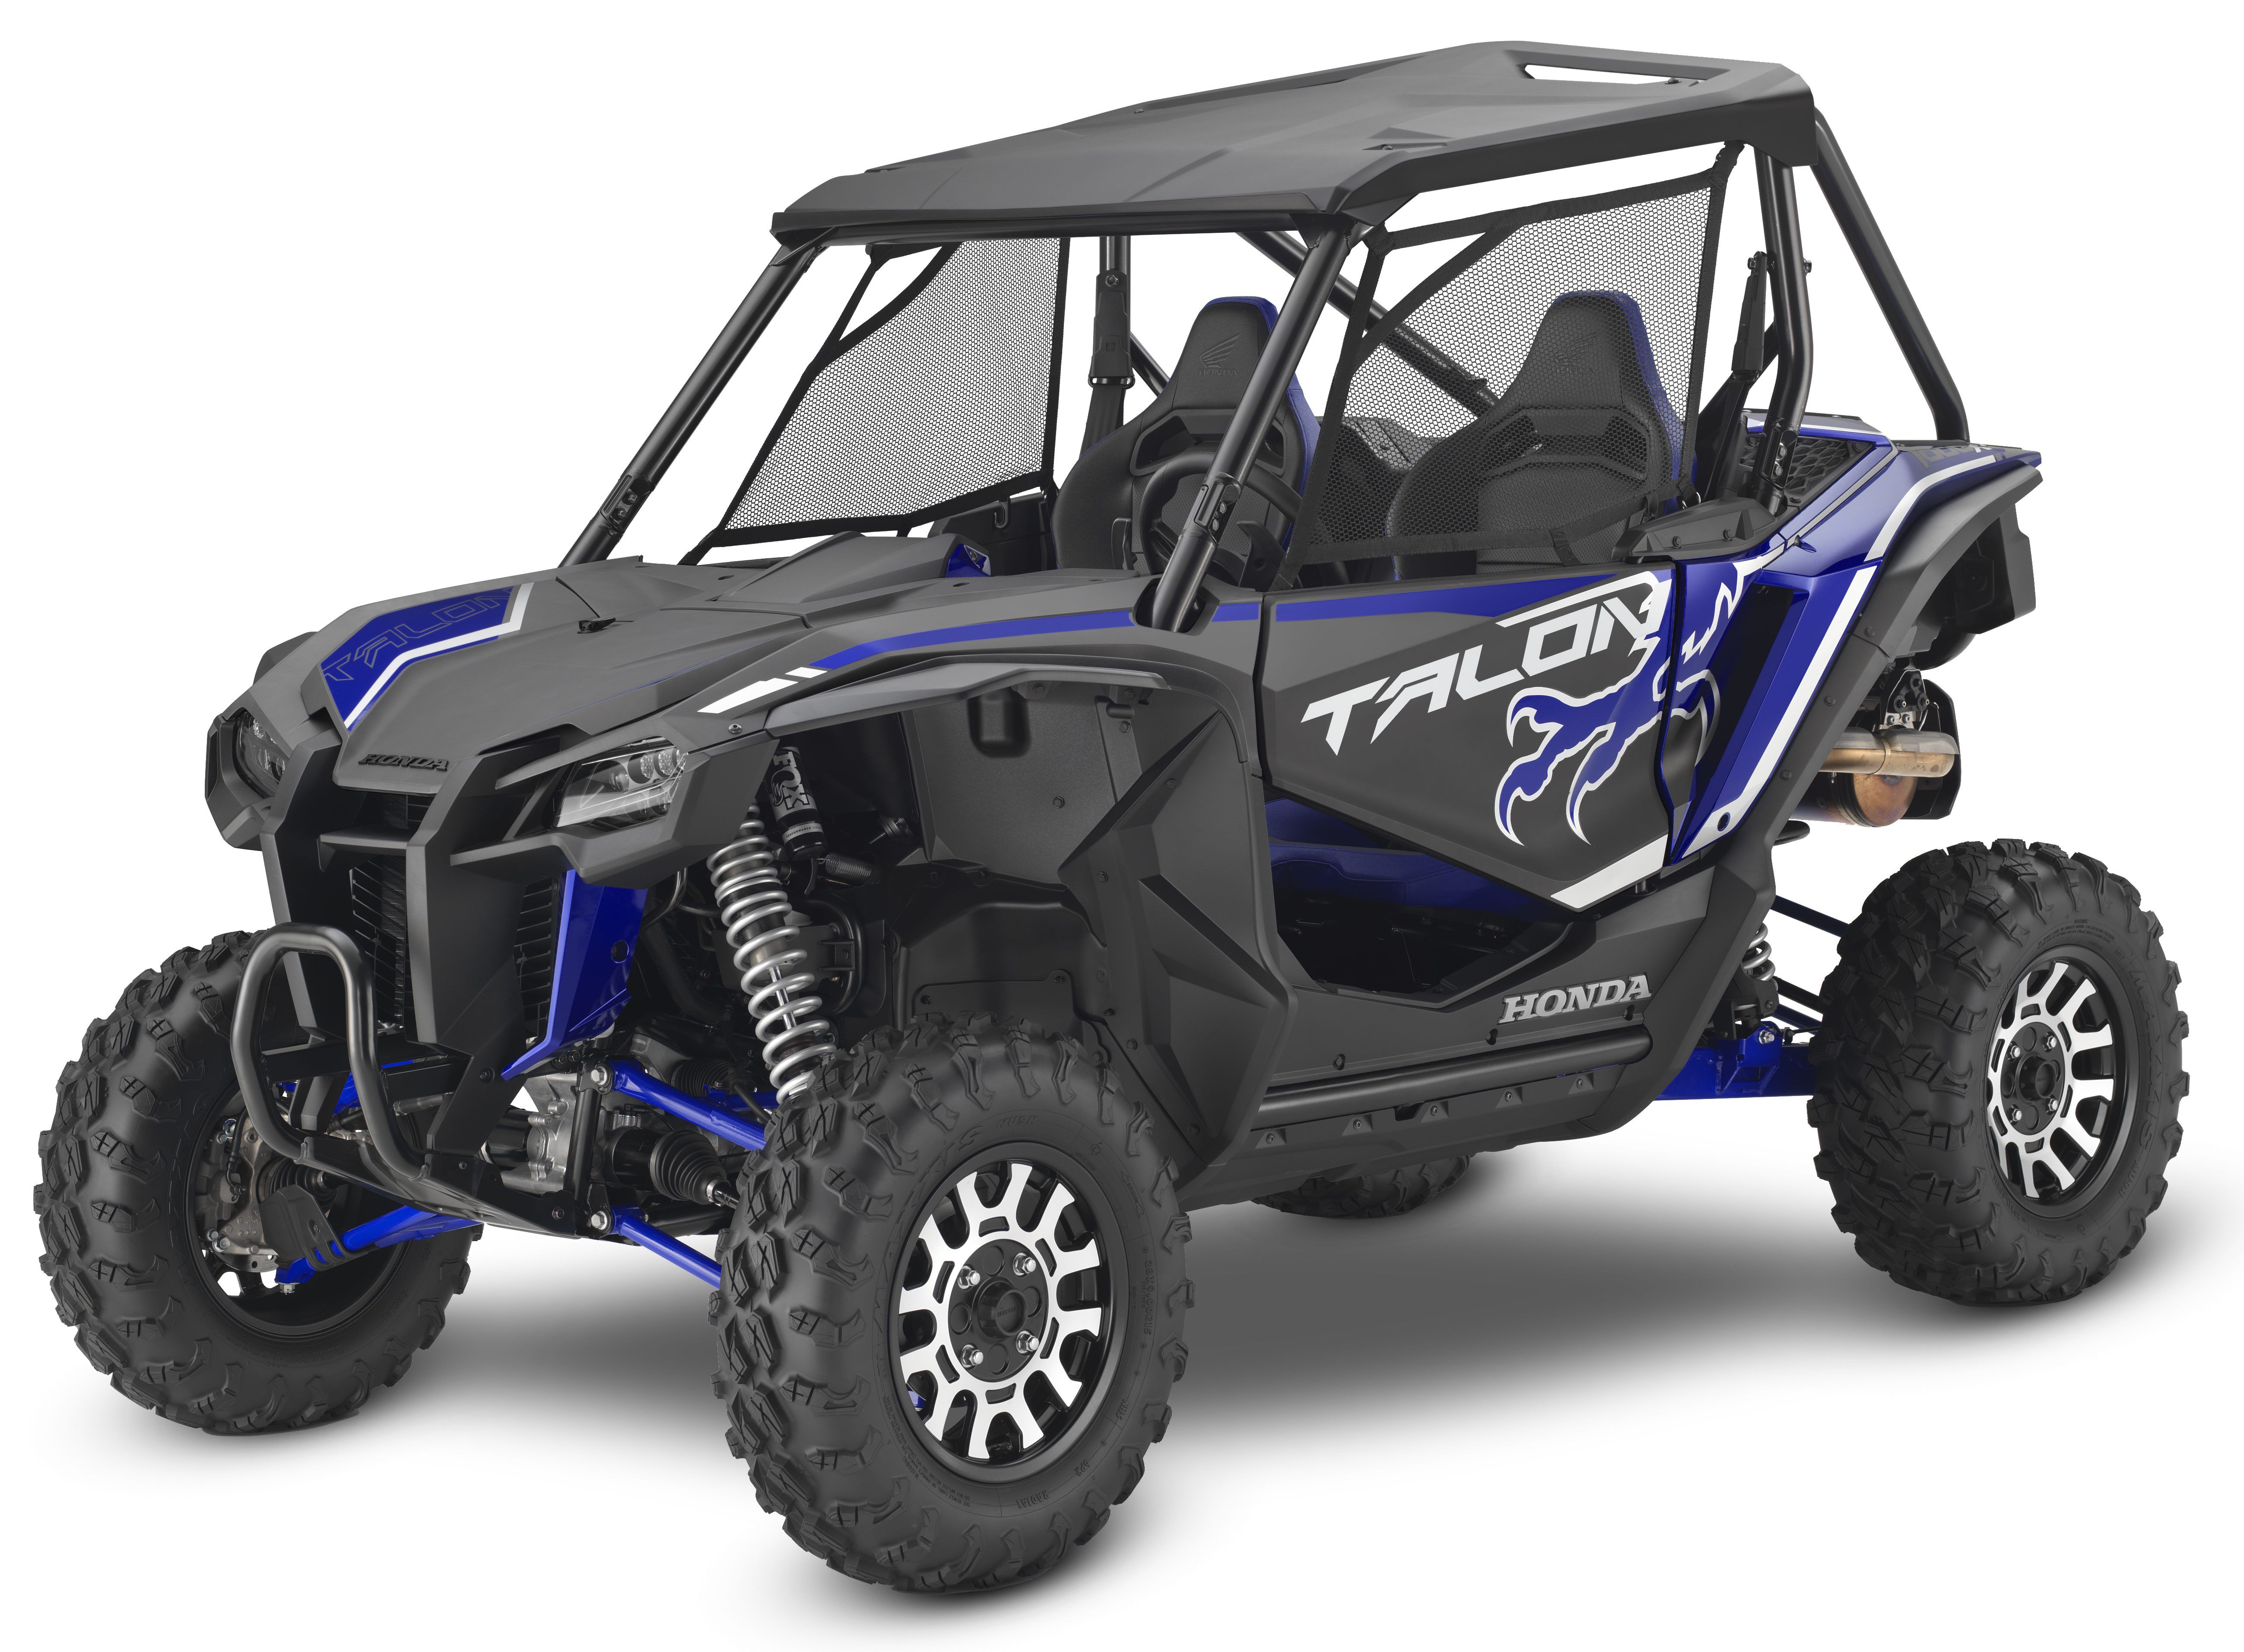 claws-out-honda-talon-1000x-and-1000r-off-road